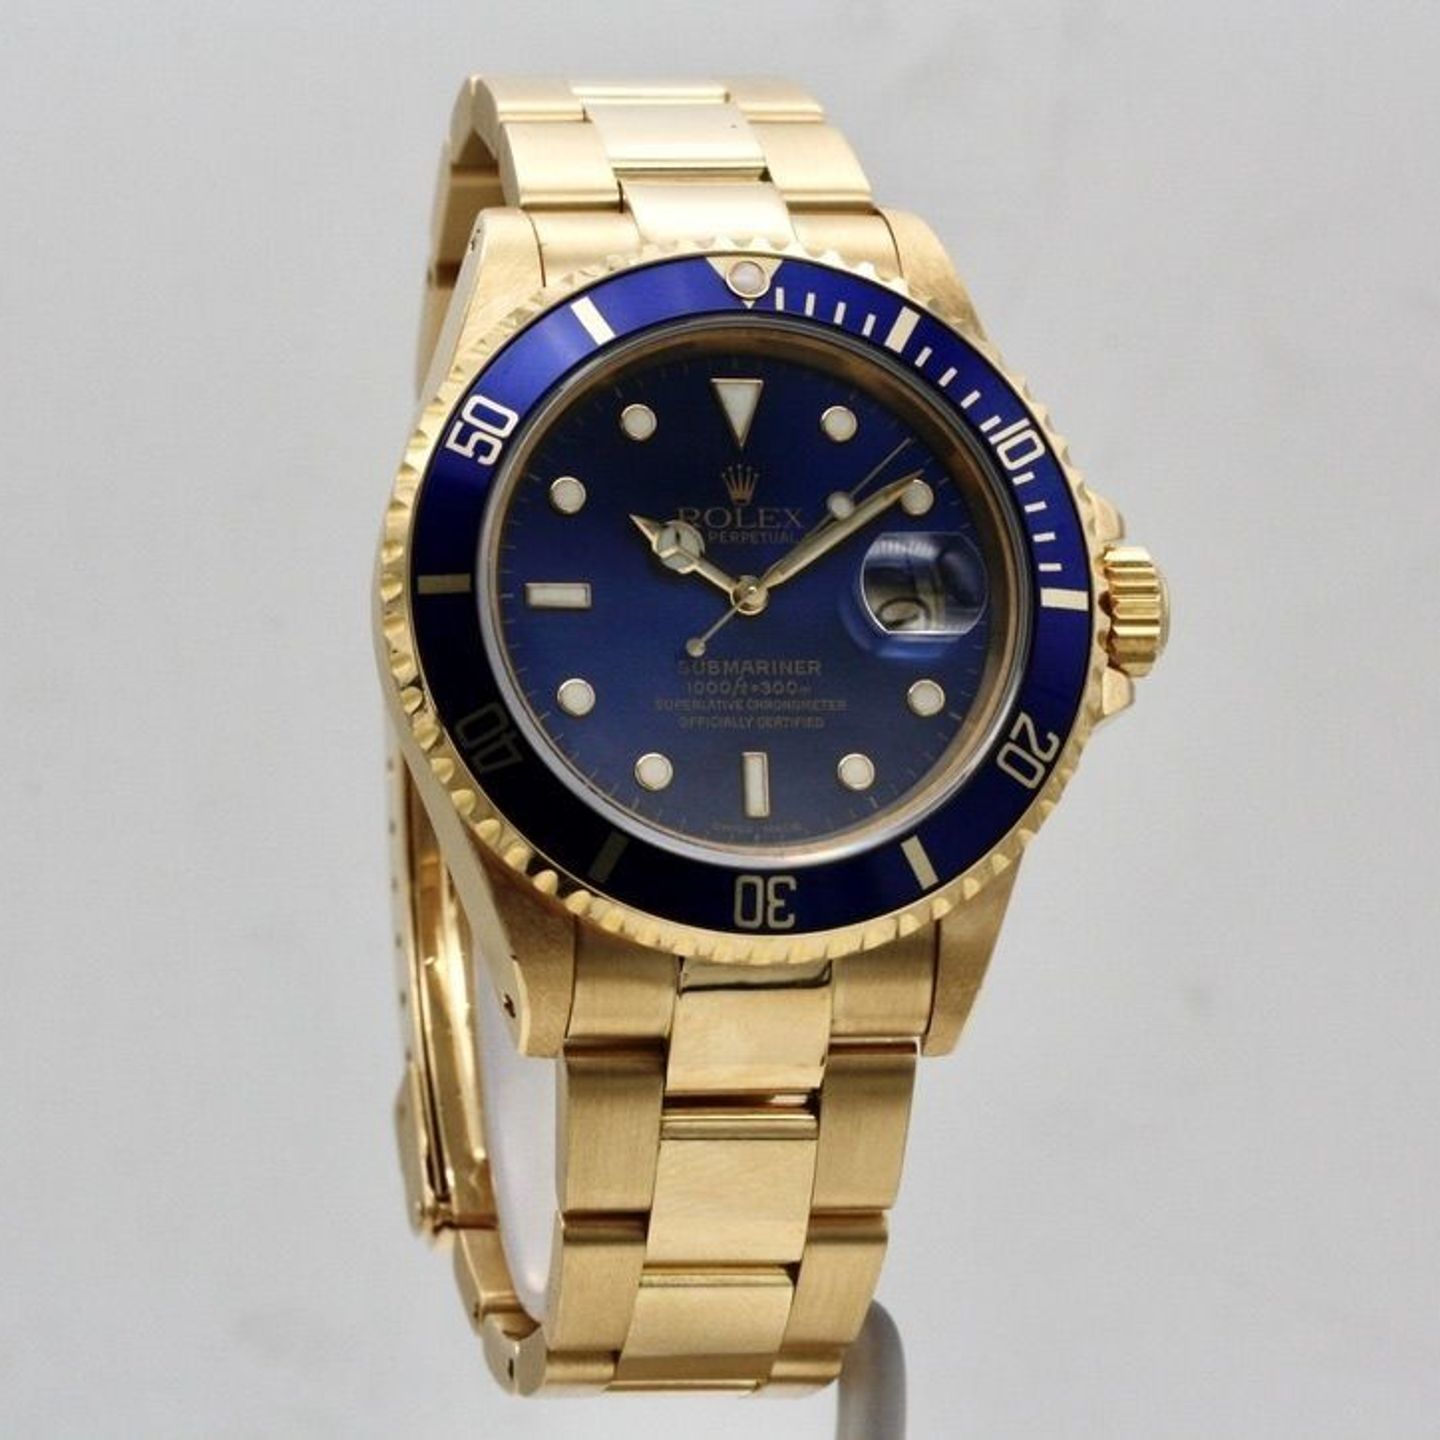 Rolex Submariner Date 16808 (1988) - Blue dial 40 mm Yellow Gold case (1/8)